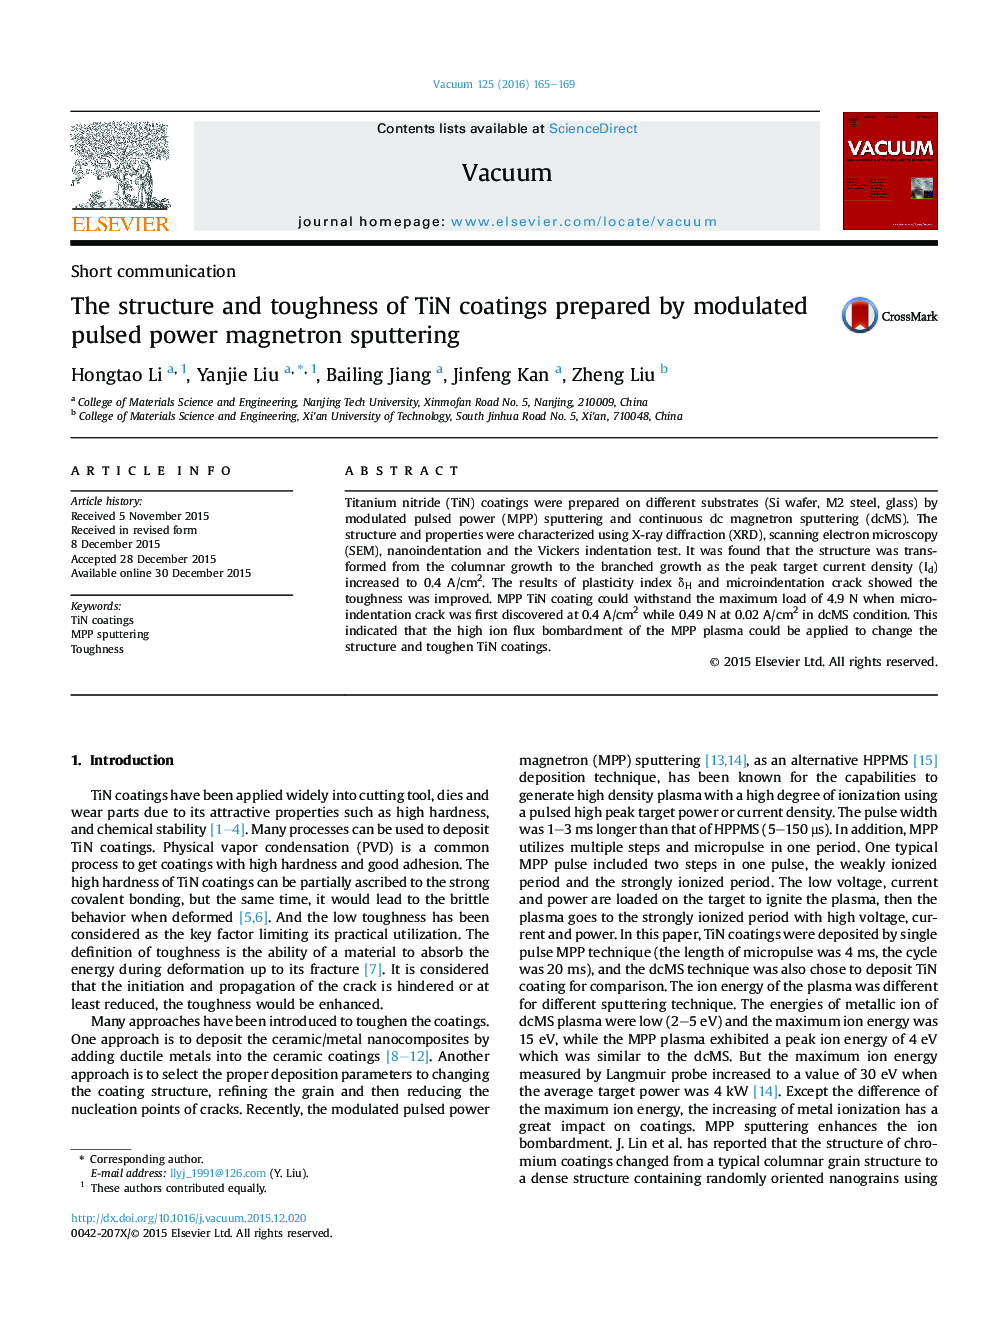 The structure and toughness of TiN coatings prepared by modulated pulsed power magnetron sputtering